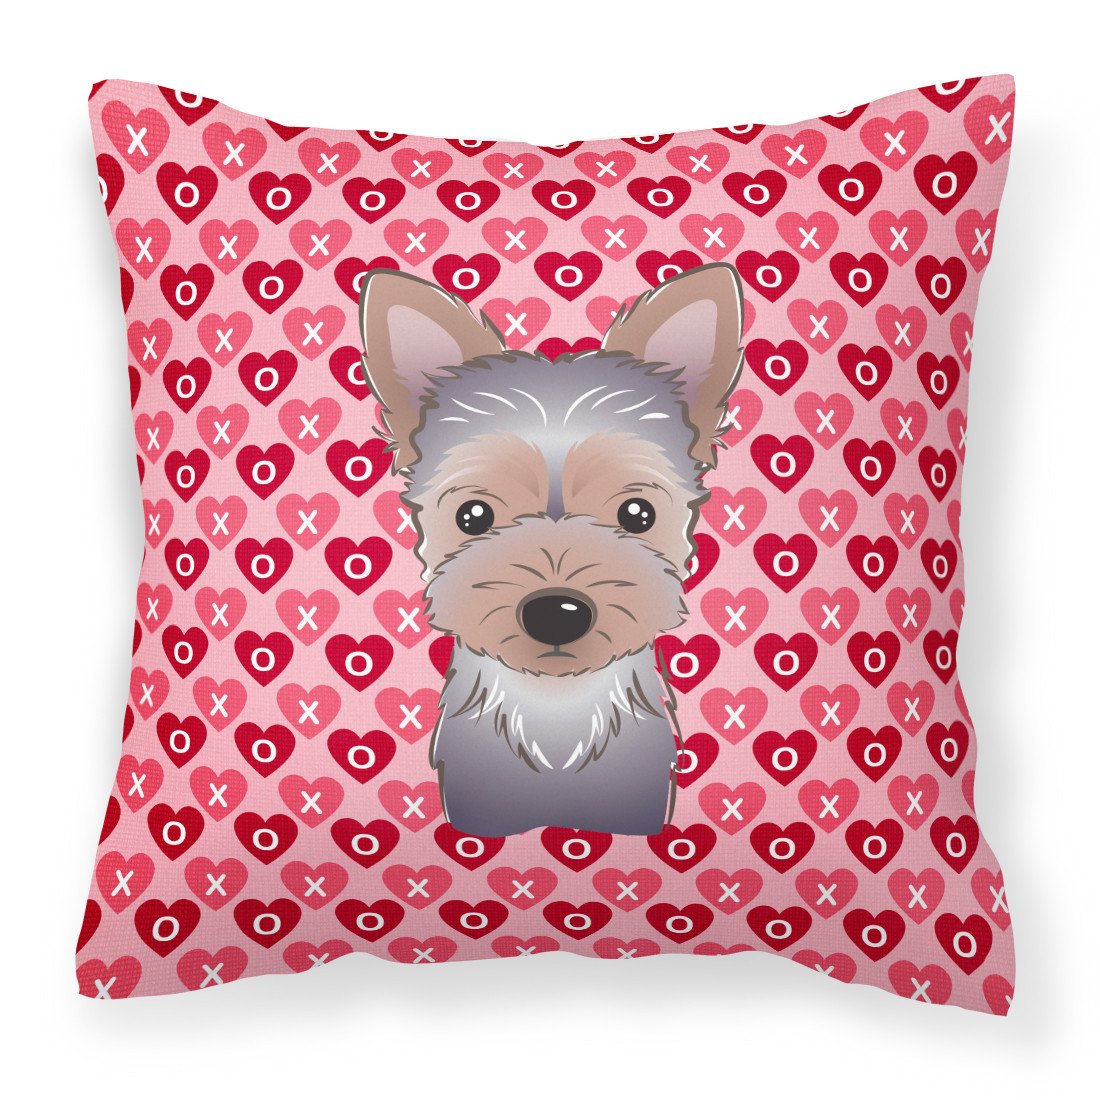 Yorkie Puppy Hearts Fabric Decorative Pillow BB5302PW1818 by Caroline's Treasures